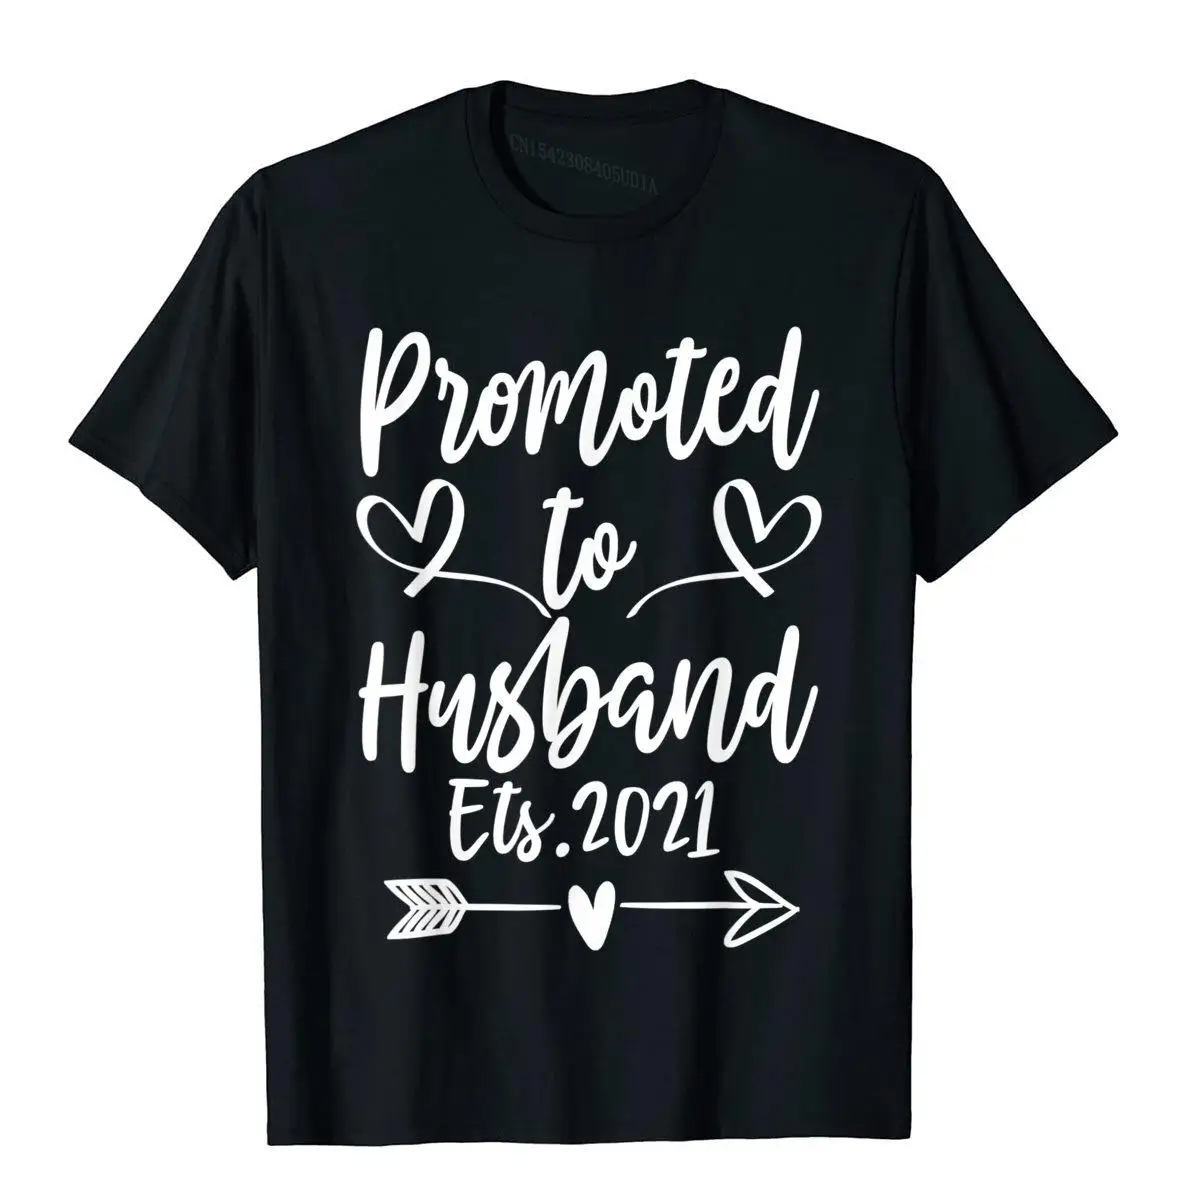 

Promoted To Husband Est 2021 Soon To Be Husband Gifts T-Shirt Cotton Tops Tees Camisas Hombre New Arrival Novelty Top T-Shirts